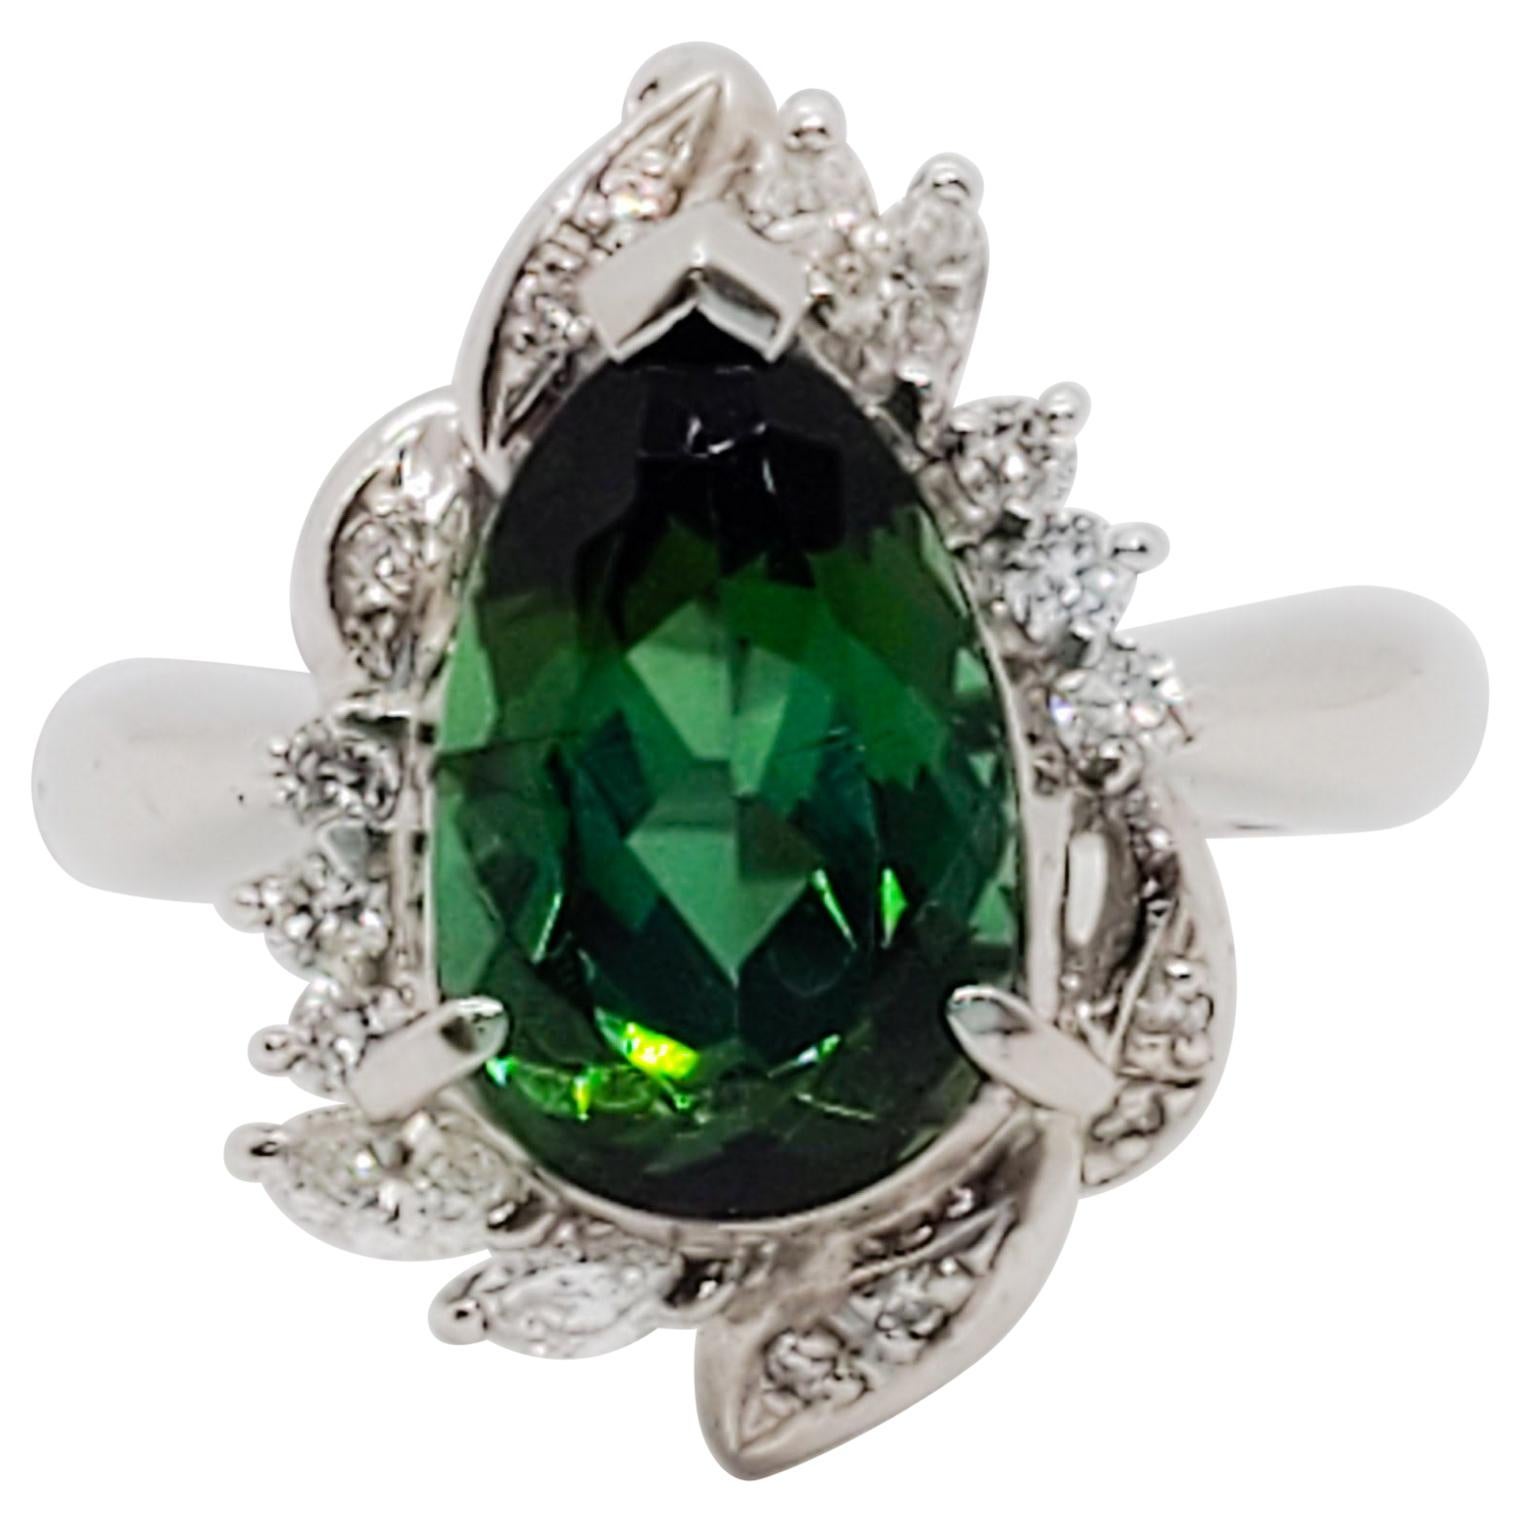 Green Tourmaline Pear and White Diamond Cocktail Ring in Platinum